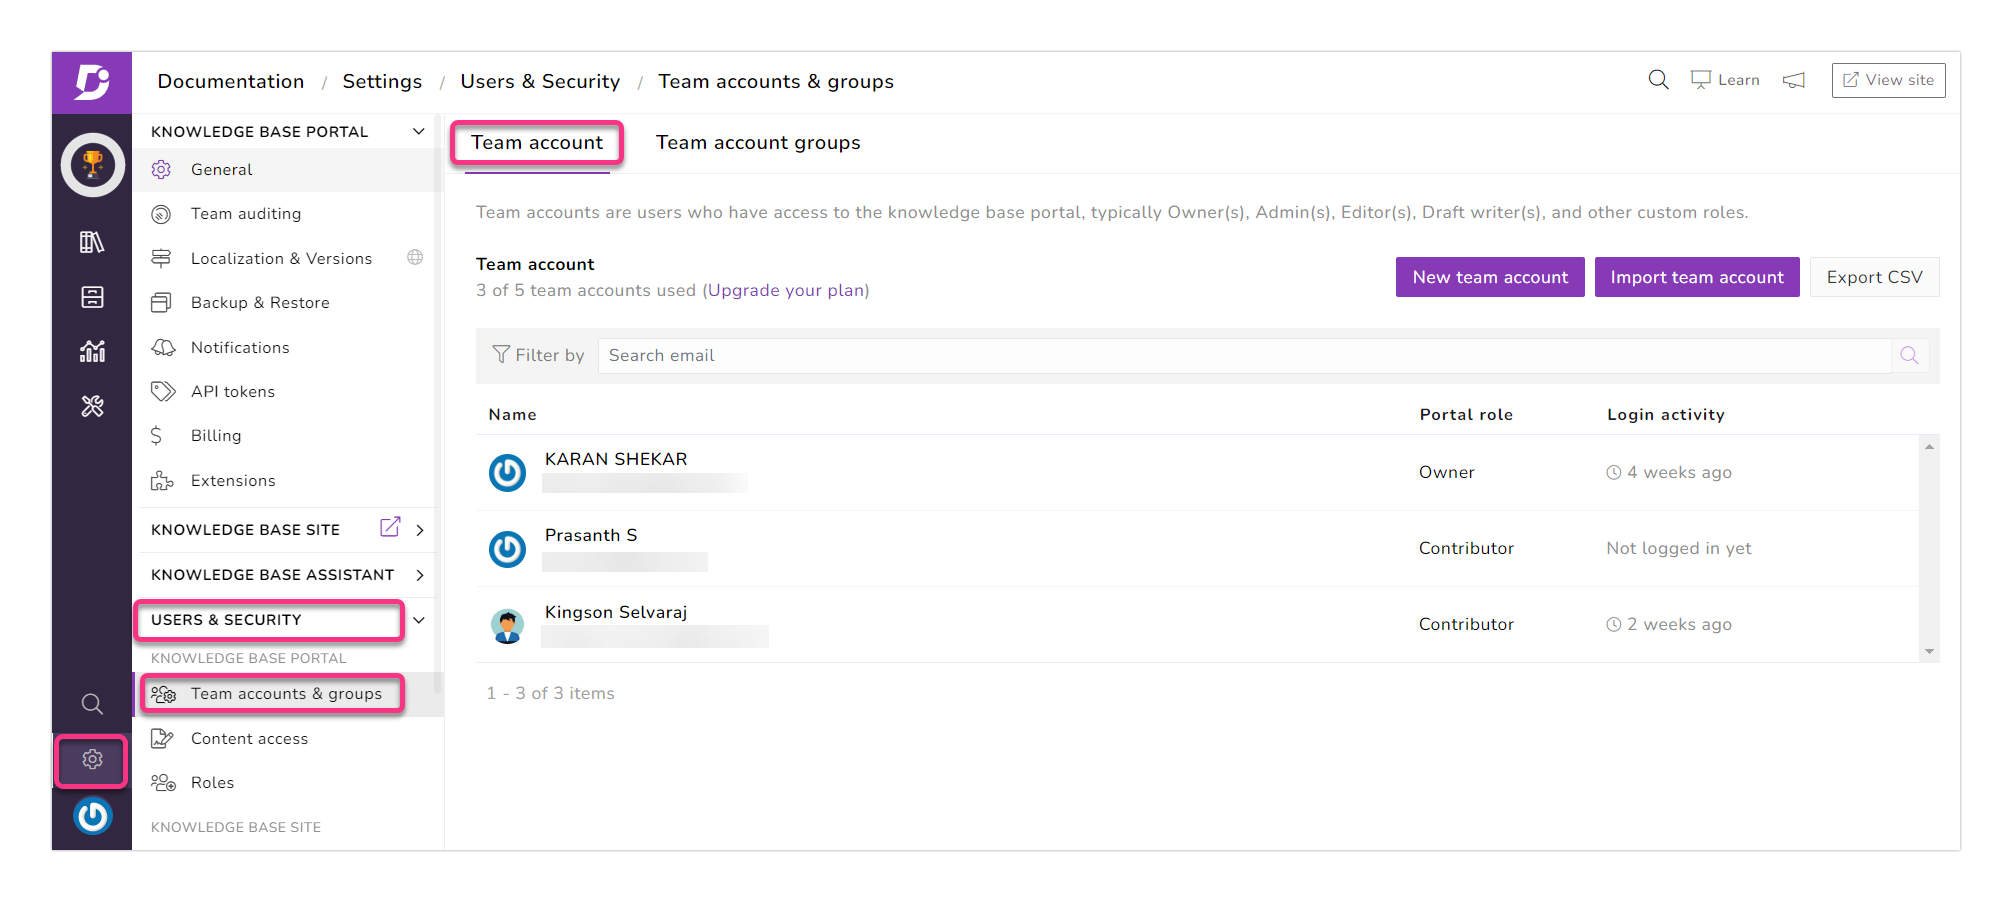 1_Screenshot_Accessing team accounts and team account groups feature